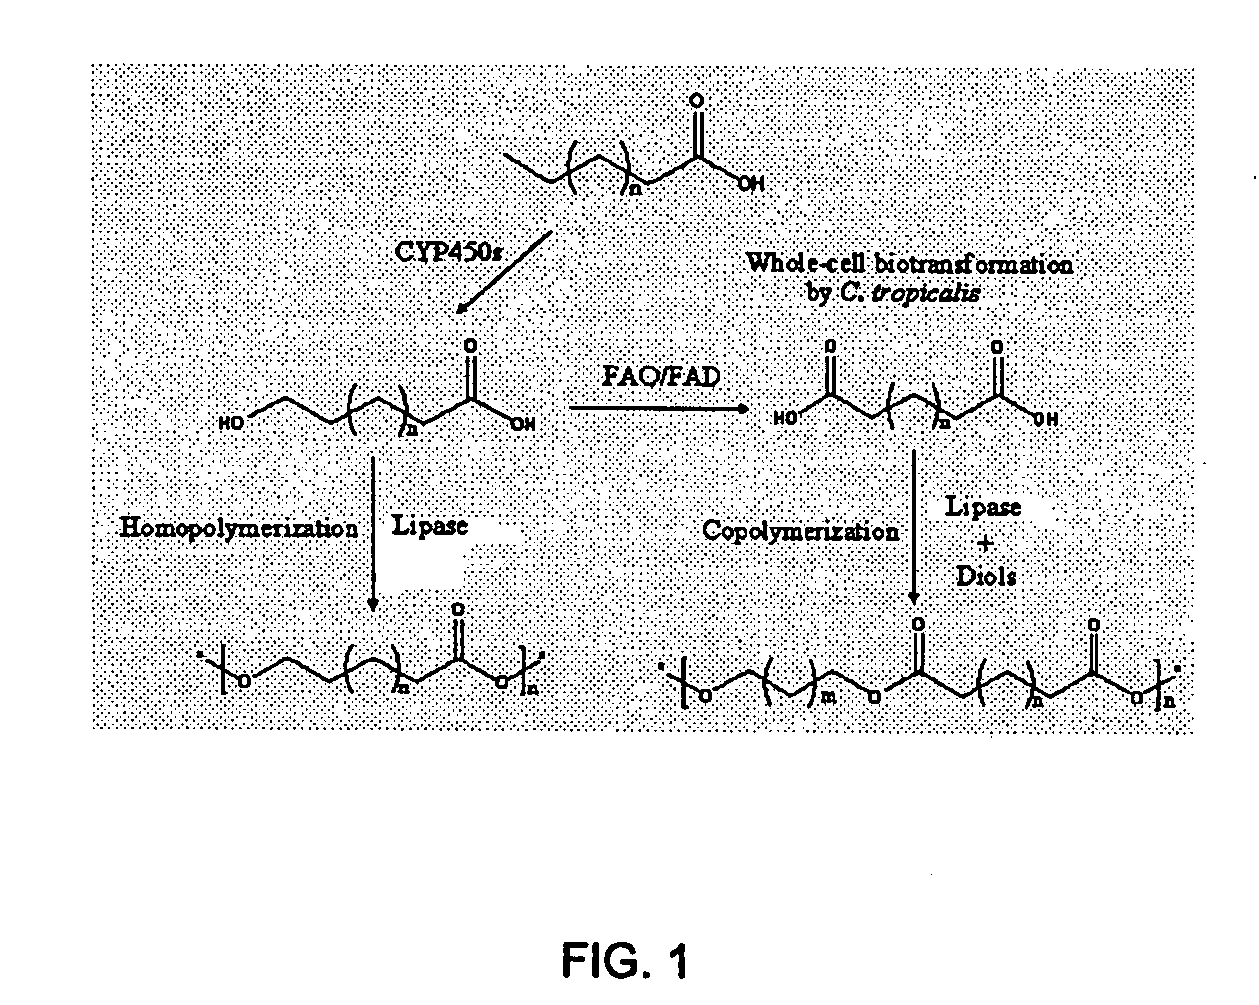 Method for preparing long-chain hydroxyacids, diacids and oligomers and polymers thereof